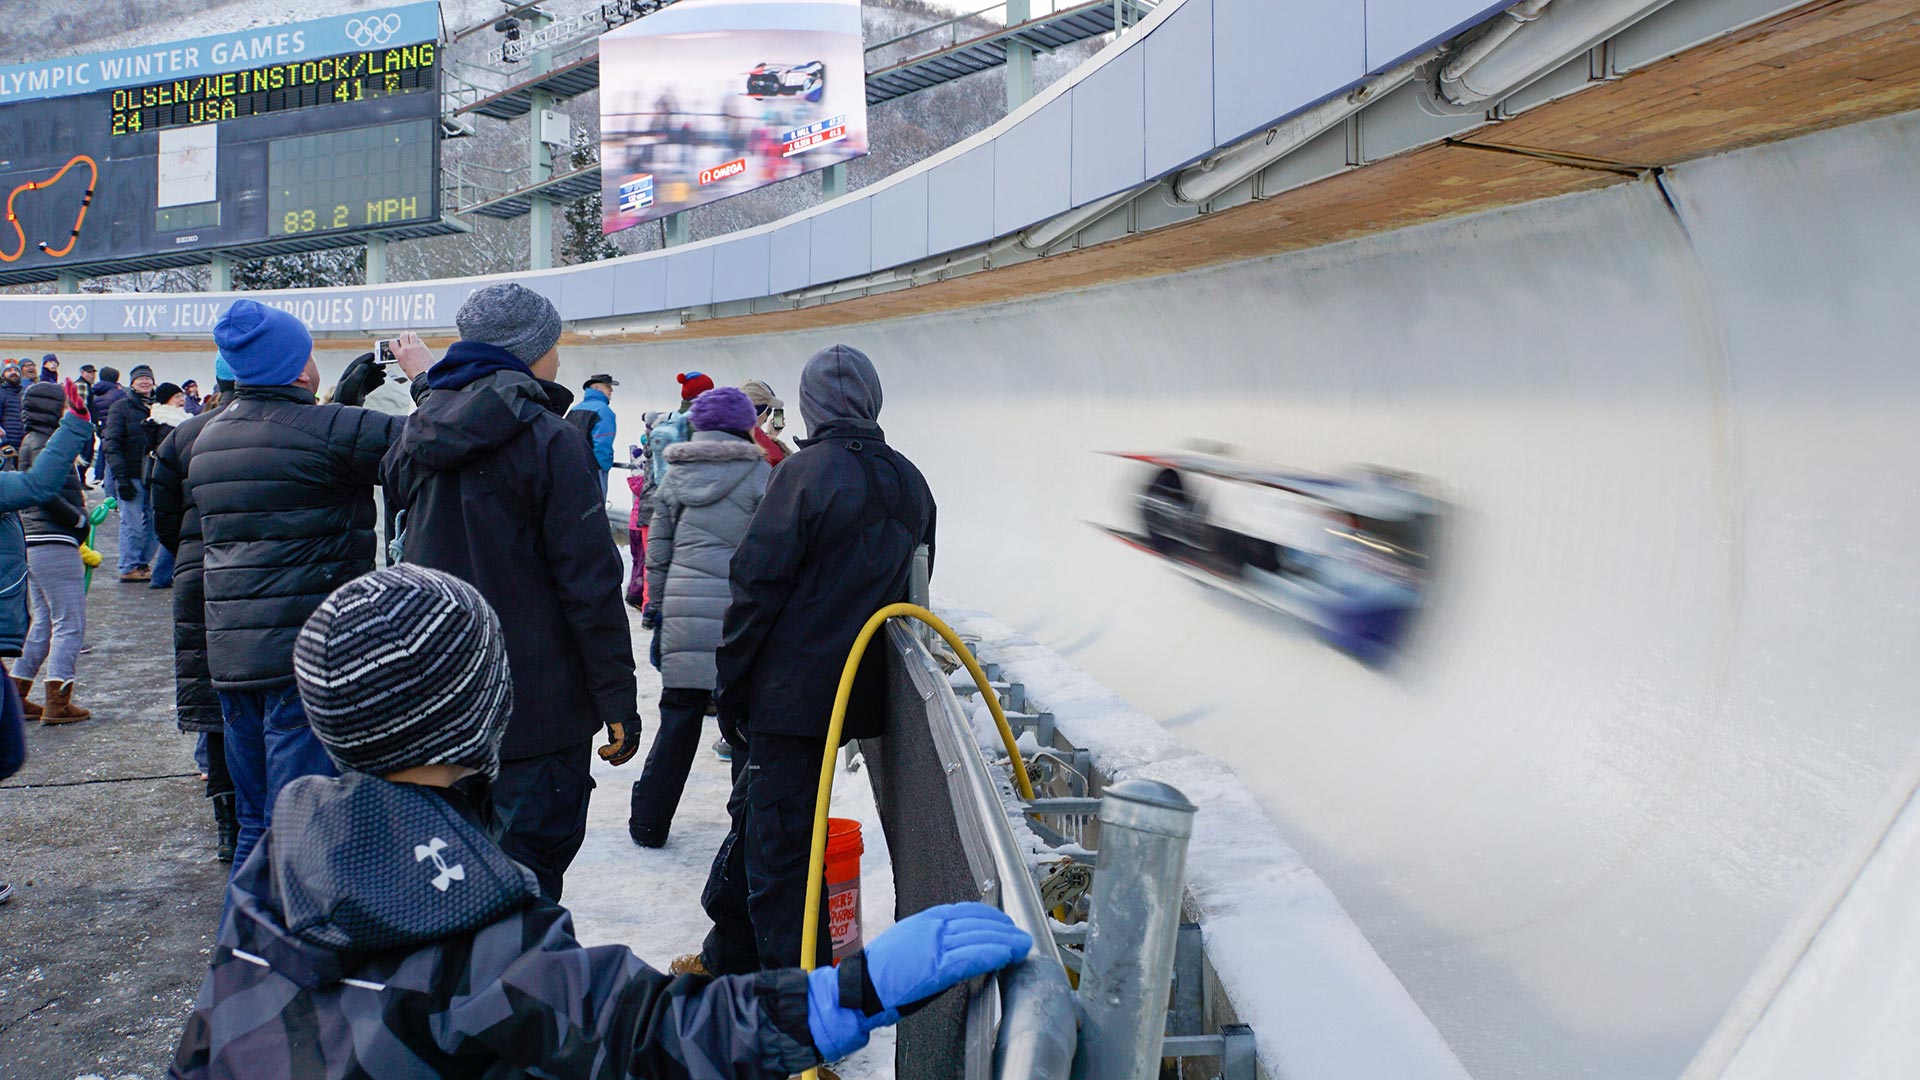 A USA bobsled speeds through the Olympic curve at Utah Olympic Park during a World Cup race (Utah Olympic Legacy Foundation)